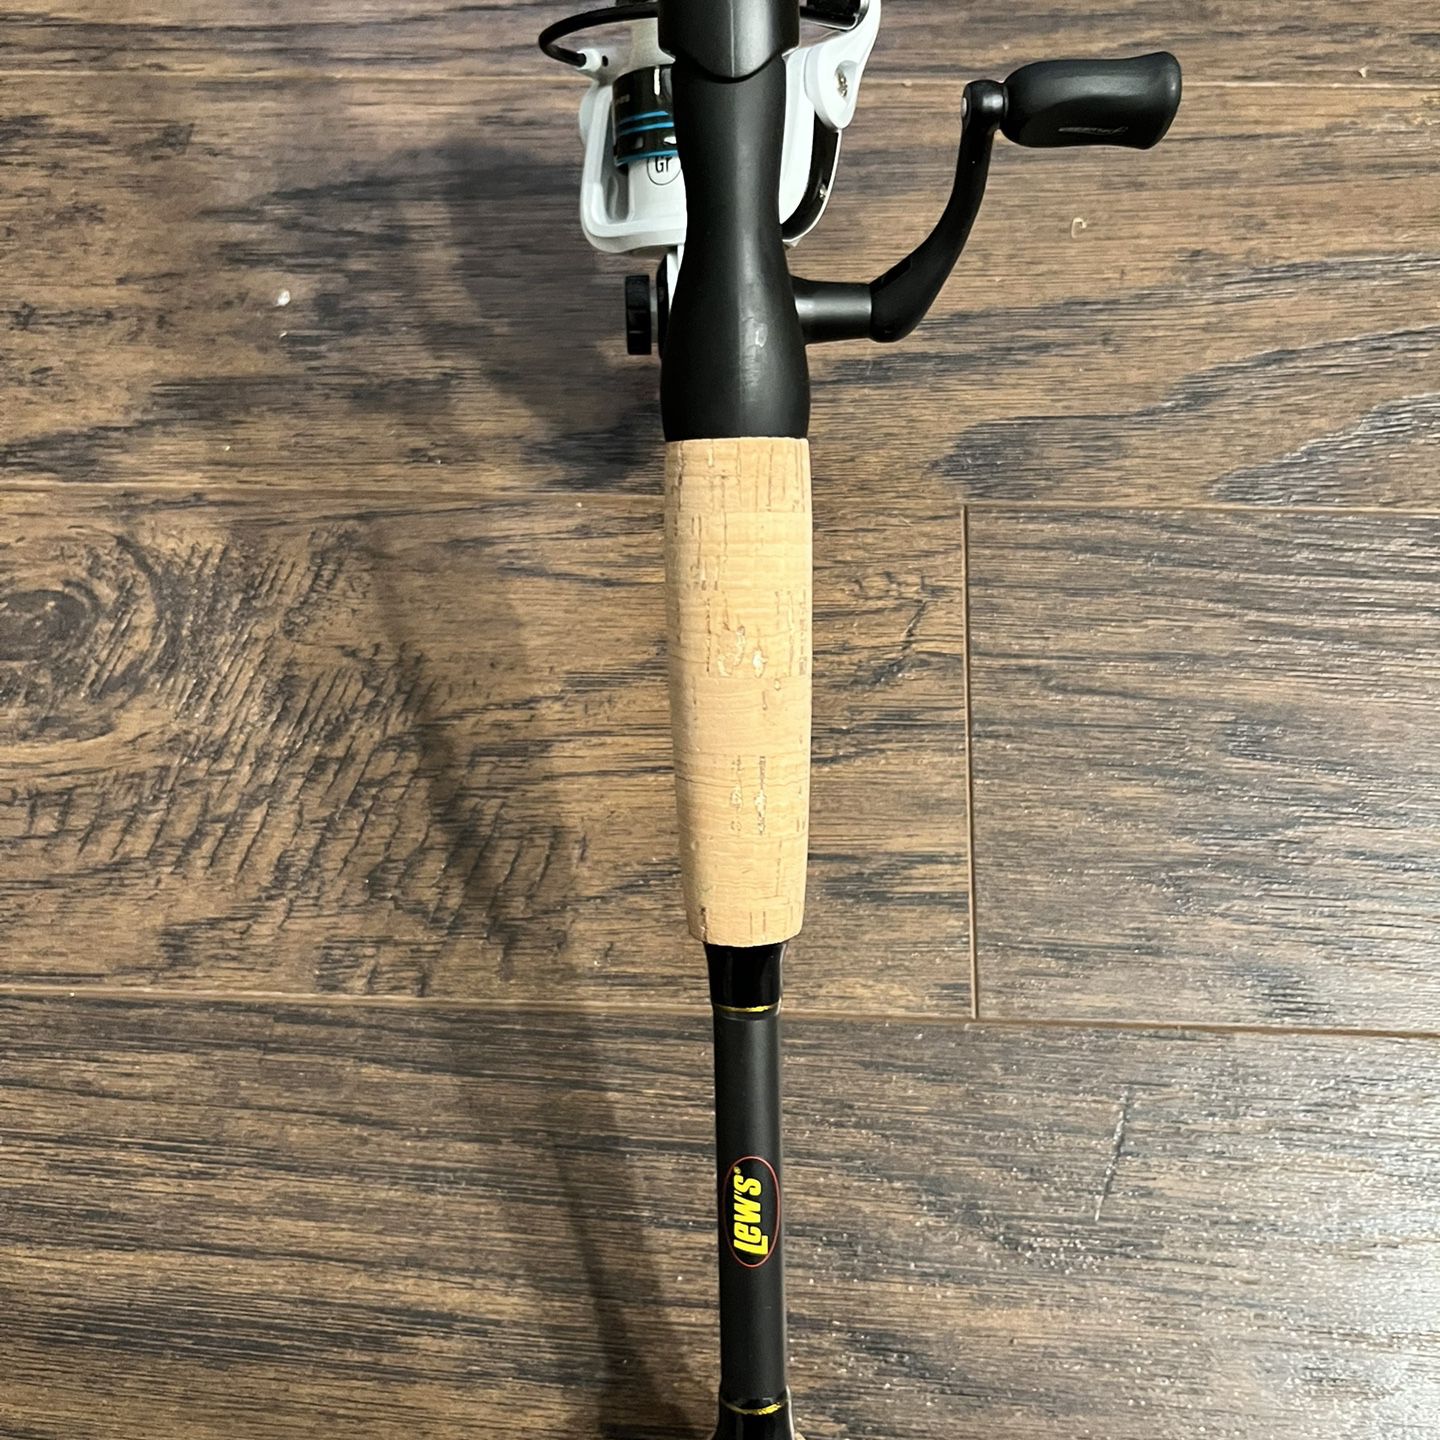 Lews Fishing Rod And Reel Spinning Caster for Sale in Roanoke, TX